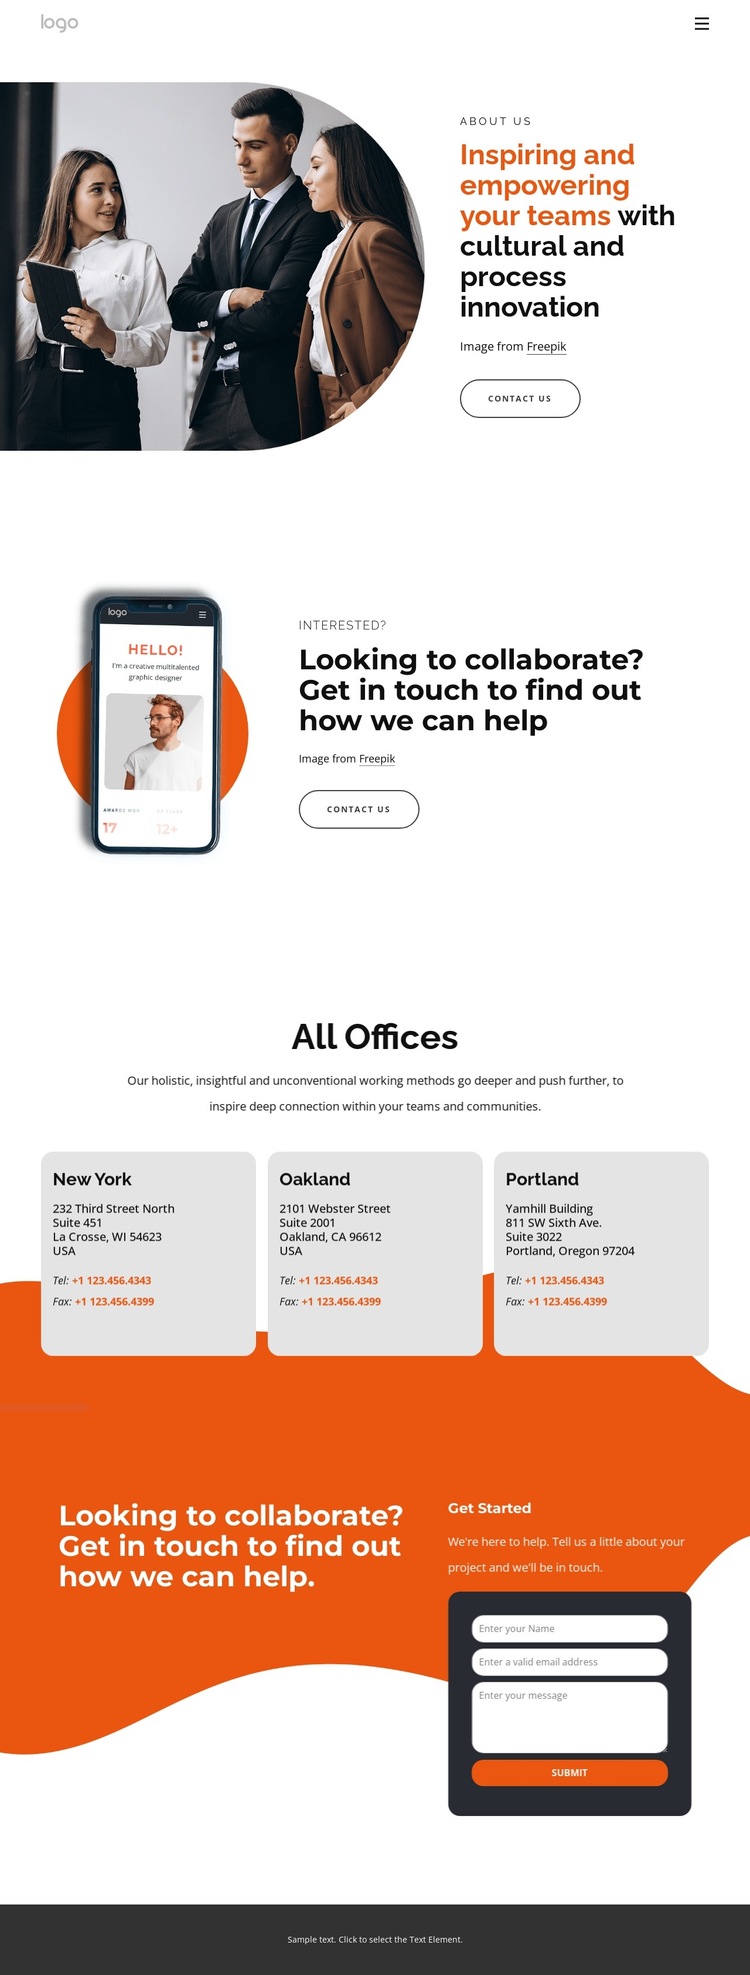 Product-based strategic solutions HTML5 Template